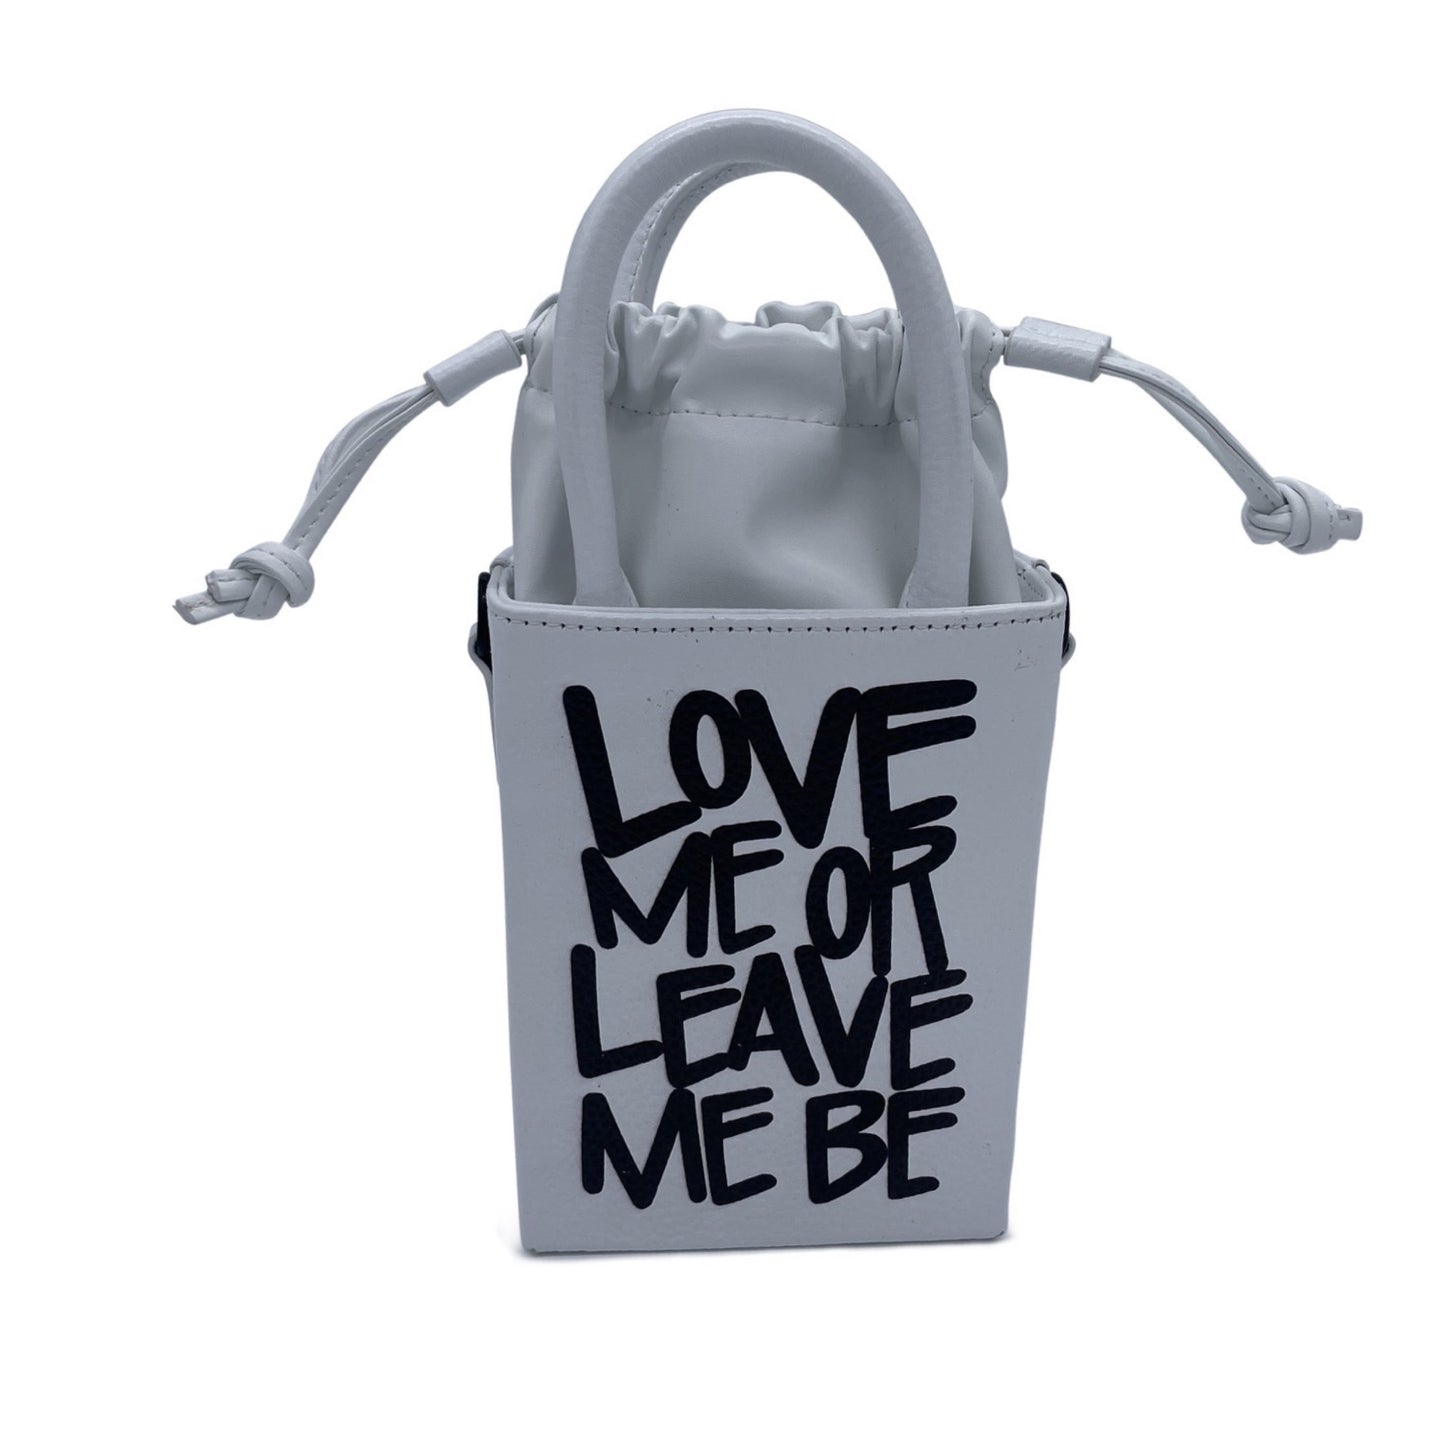 RD | MAYA WINSTON - SMALL LEATHER TOTE "LOVE ME OR LEAVE ME BE" - WHITE